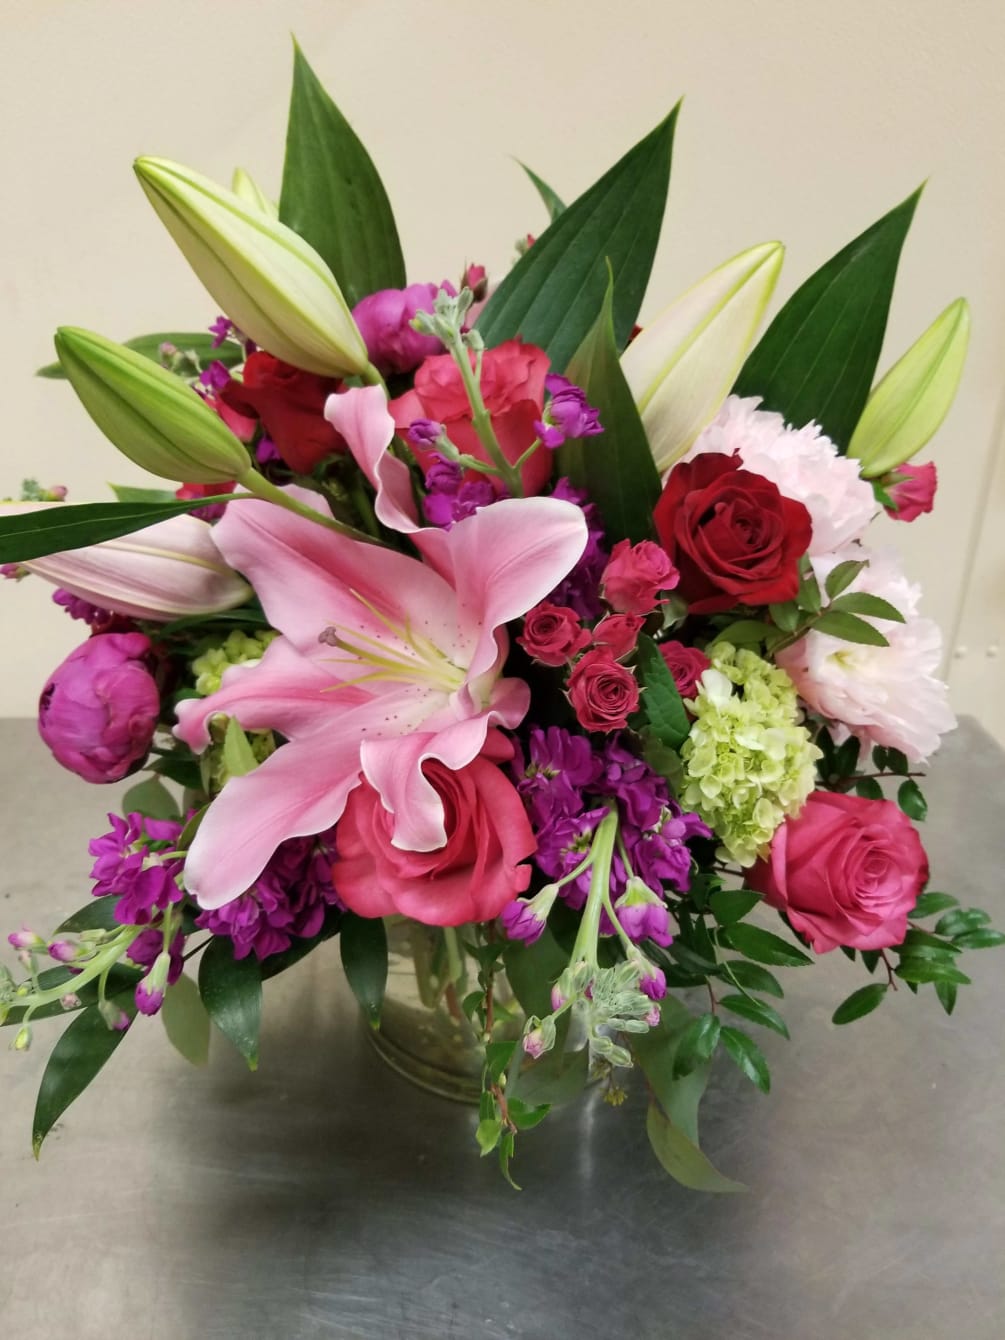 This premium assortment of blooms will certainly get attention! Large Oriental lilies